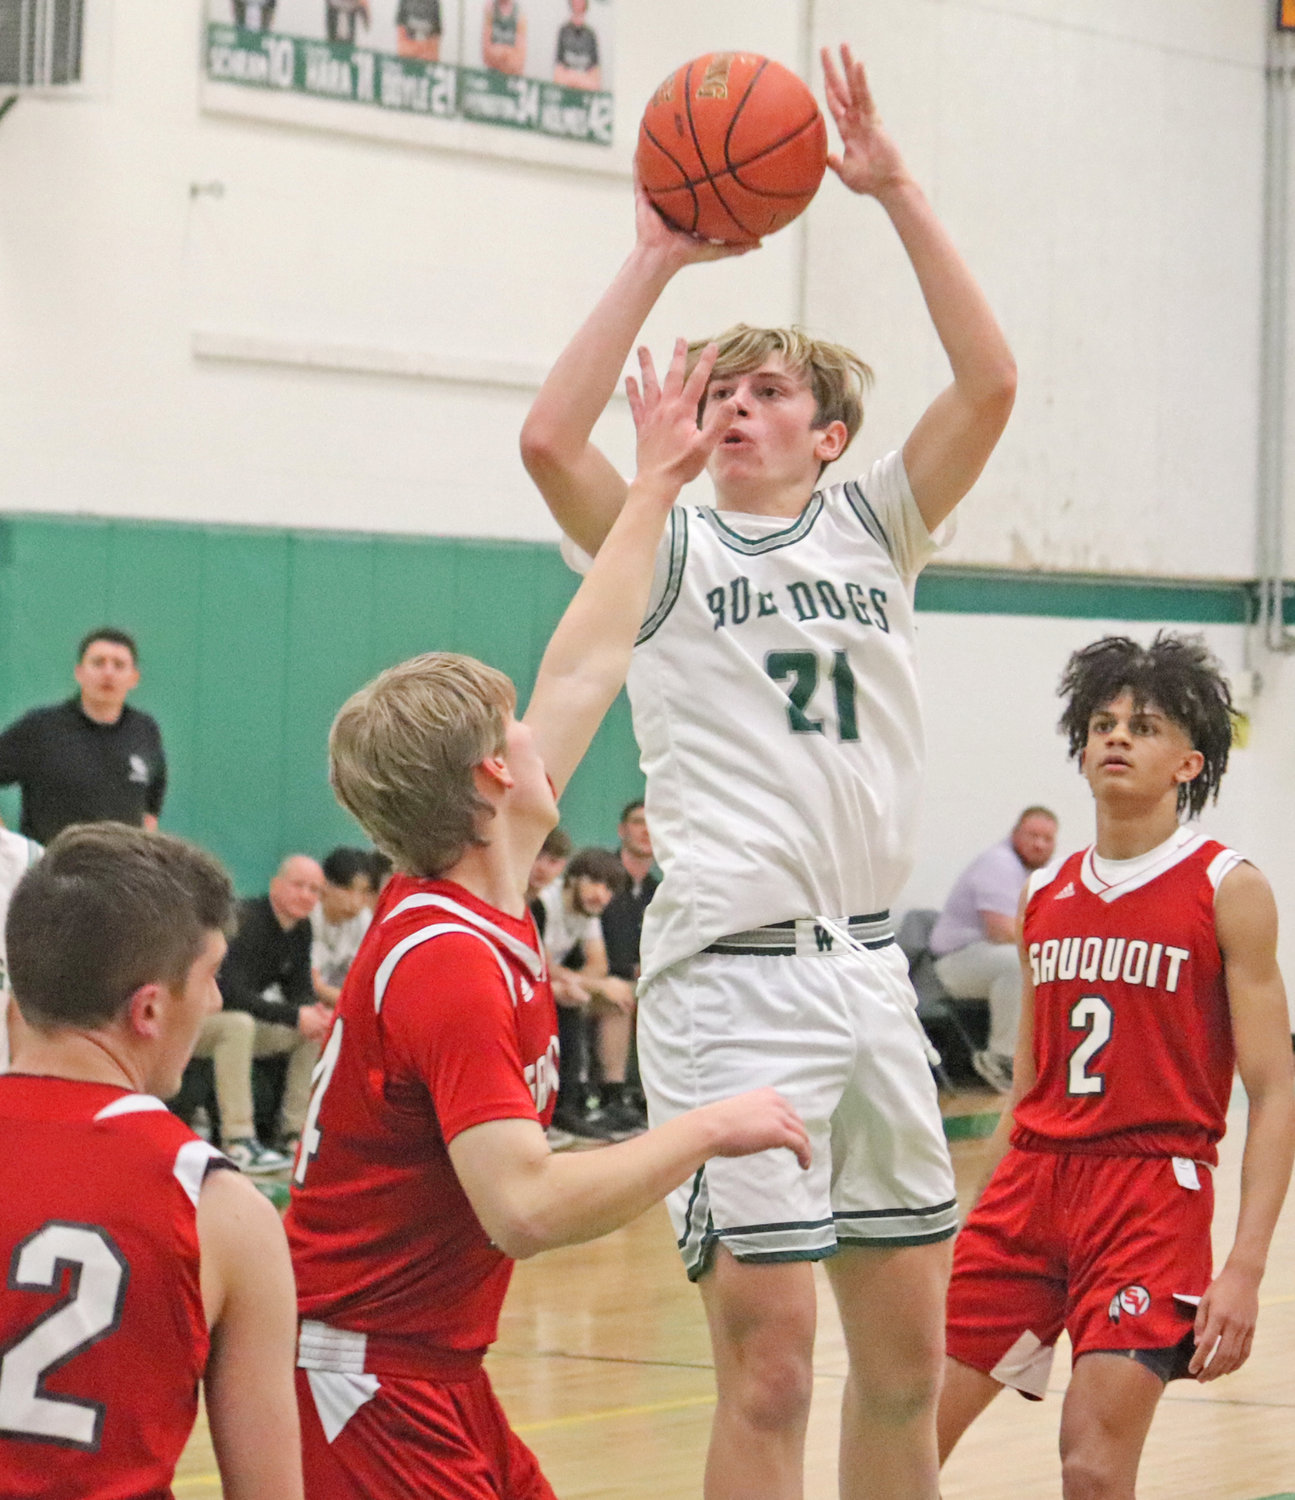 Westmoreland’s Bryan Doyle goes up for a shot against Sauquoit Valley Tuesday night at home. Doyle’s three-pointer tied the game at the end of regulation to get the game to overtime, where the Bulldogs won 57-54. Doyle led the team with 13 points.